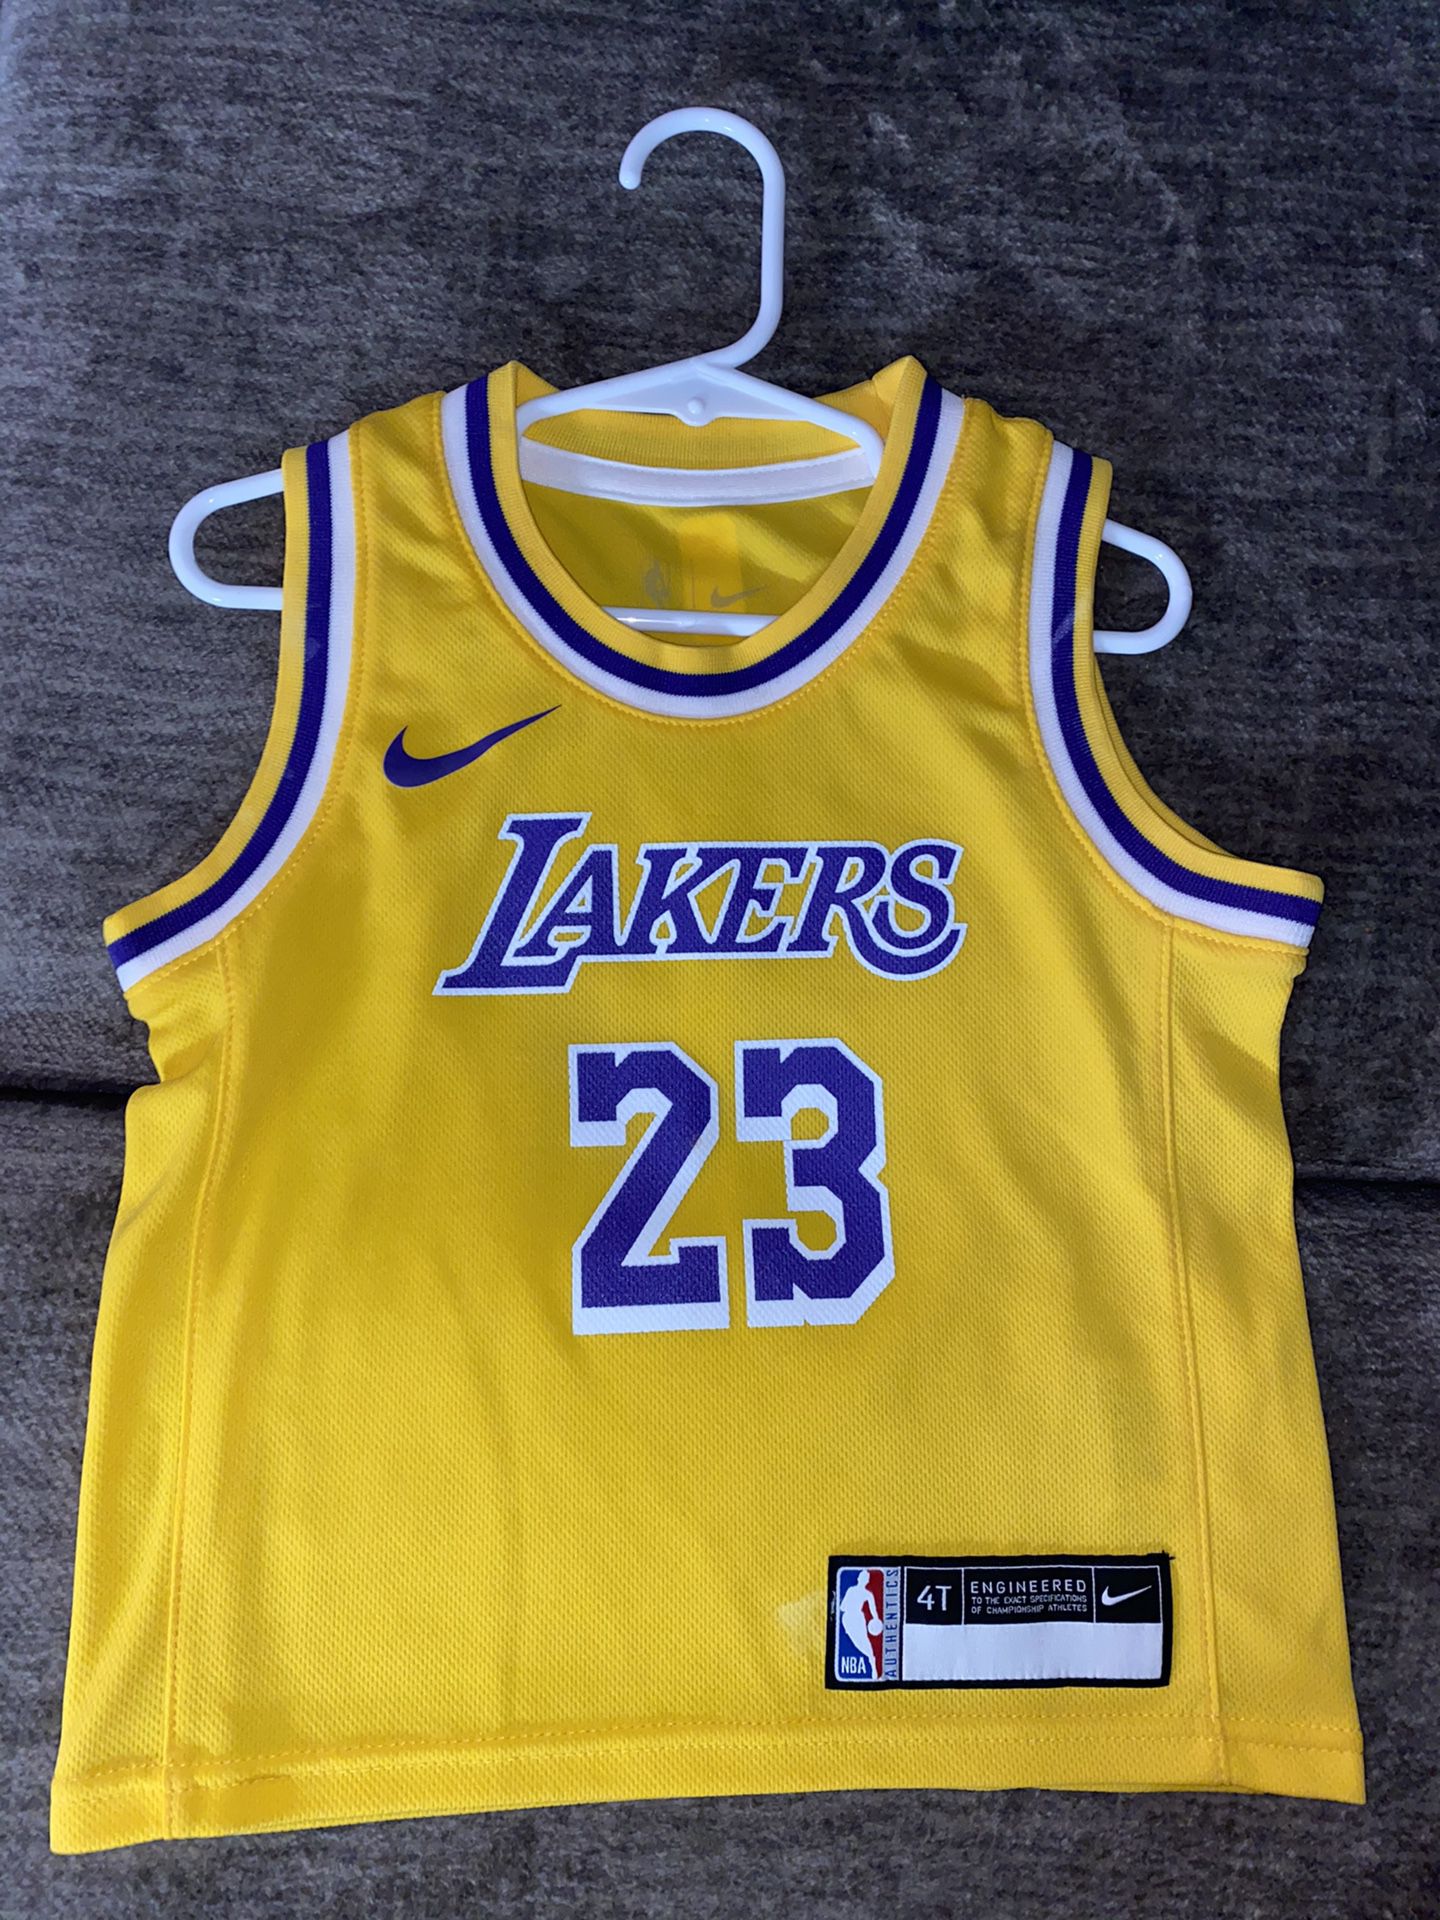 Toddler Lakers Jersey 